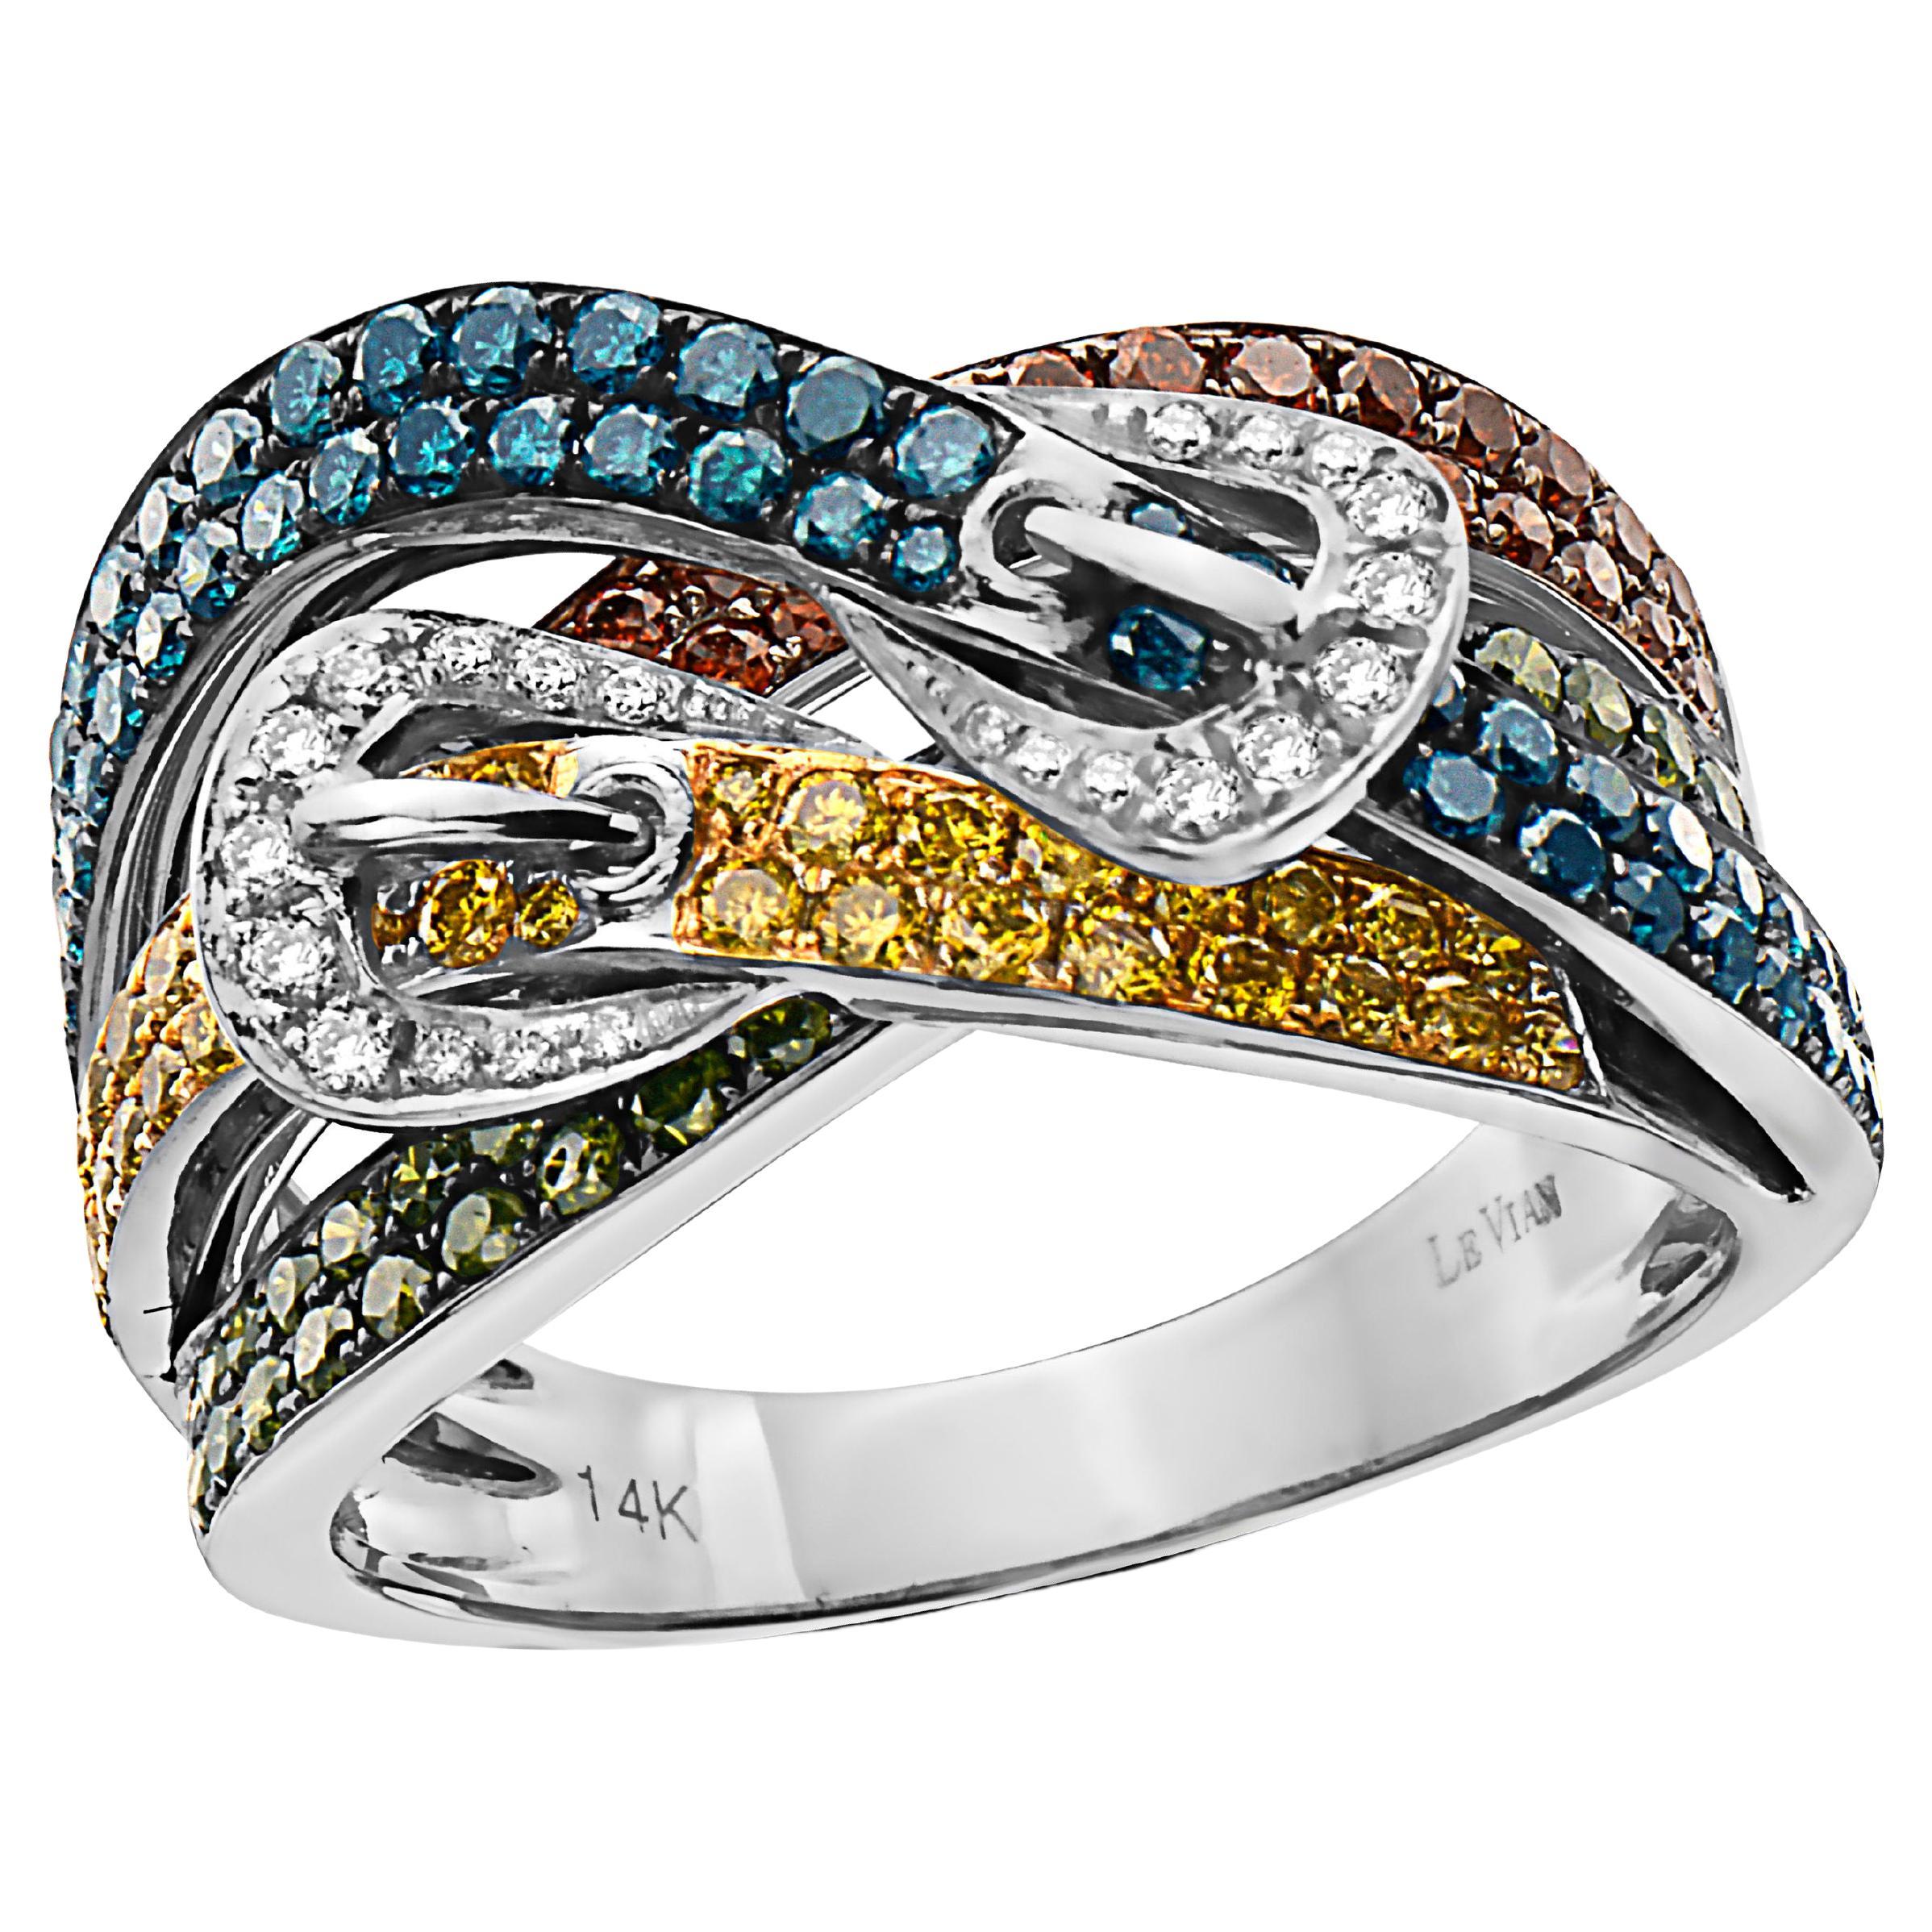 Grand Sample Sale Ring 1 1/2 Cts Red Green White Diamonds, Set in 14K White Gold For Sale